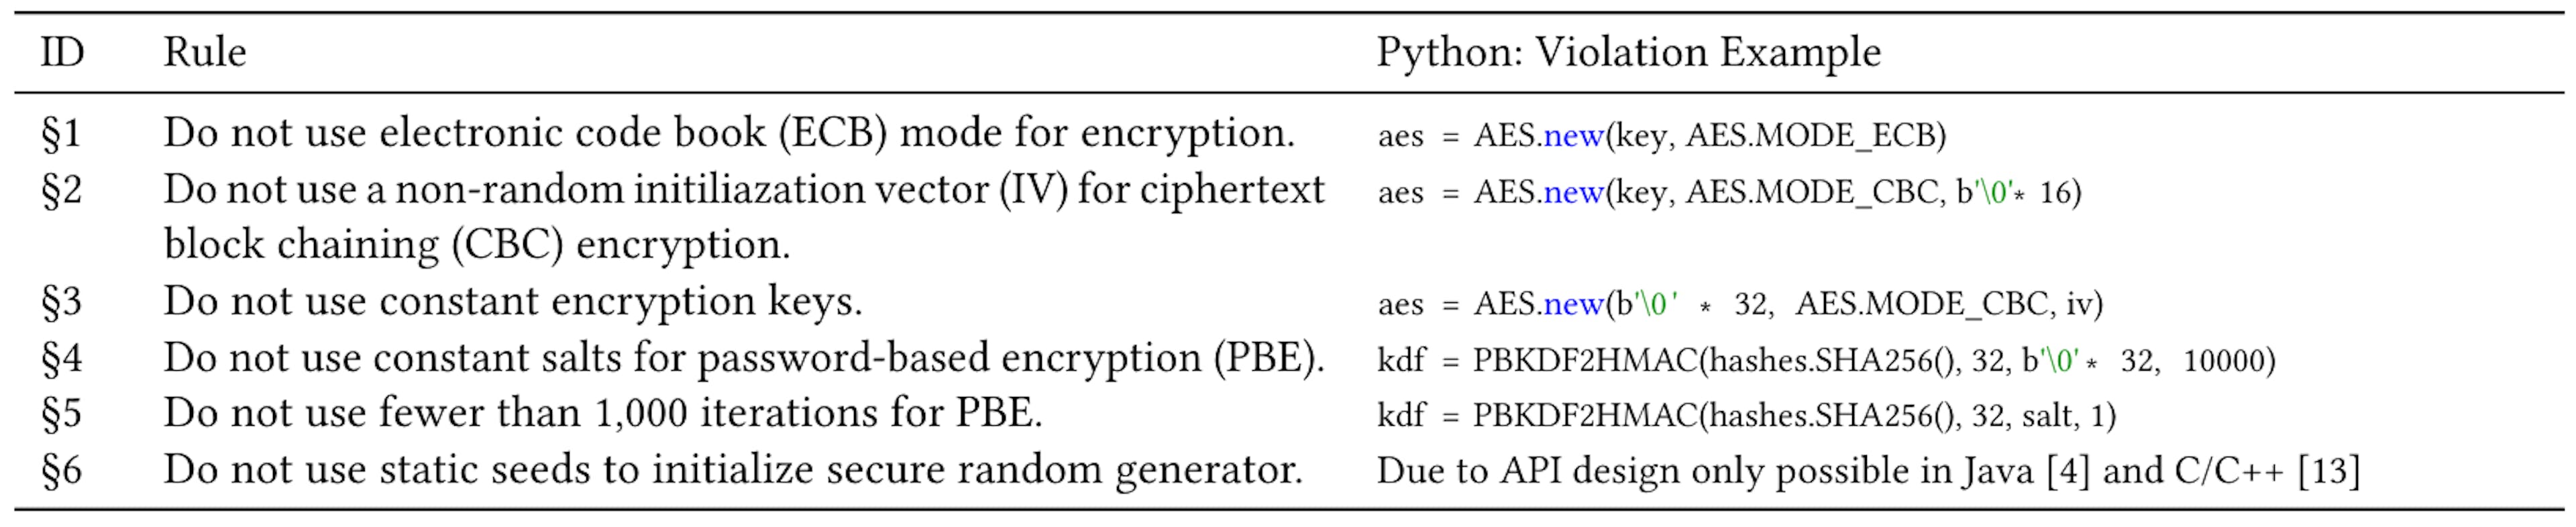 Table 1: Six commonly discussed crypto misuses in Java and C [4, 13] with an example of a violation in Python.